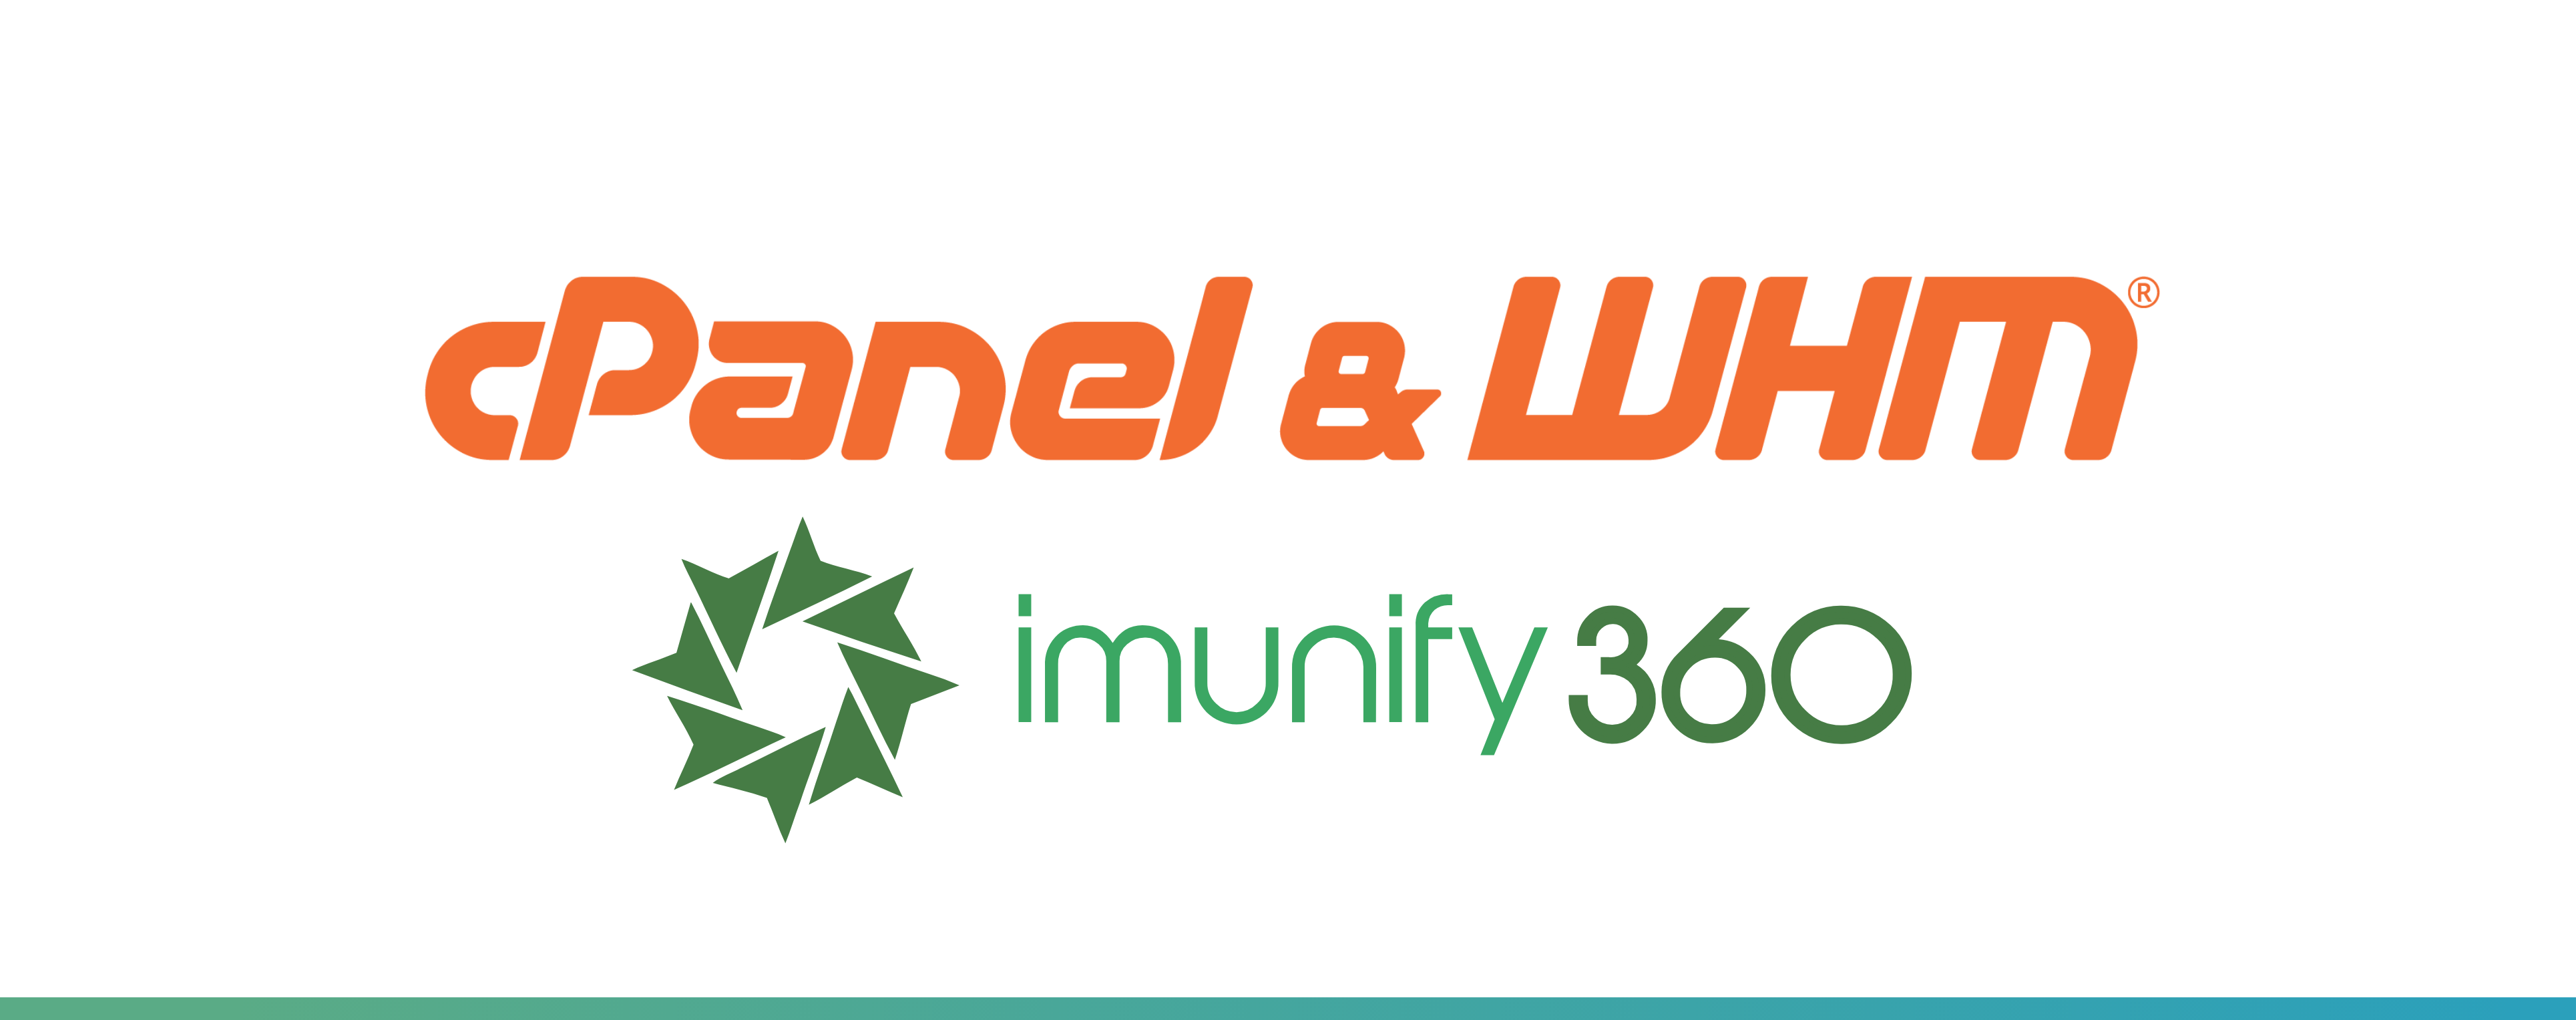 Introducing ImunifyAV to cPanel & WHM servers